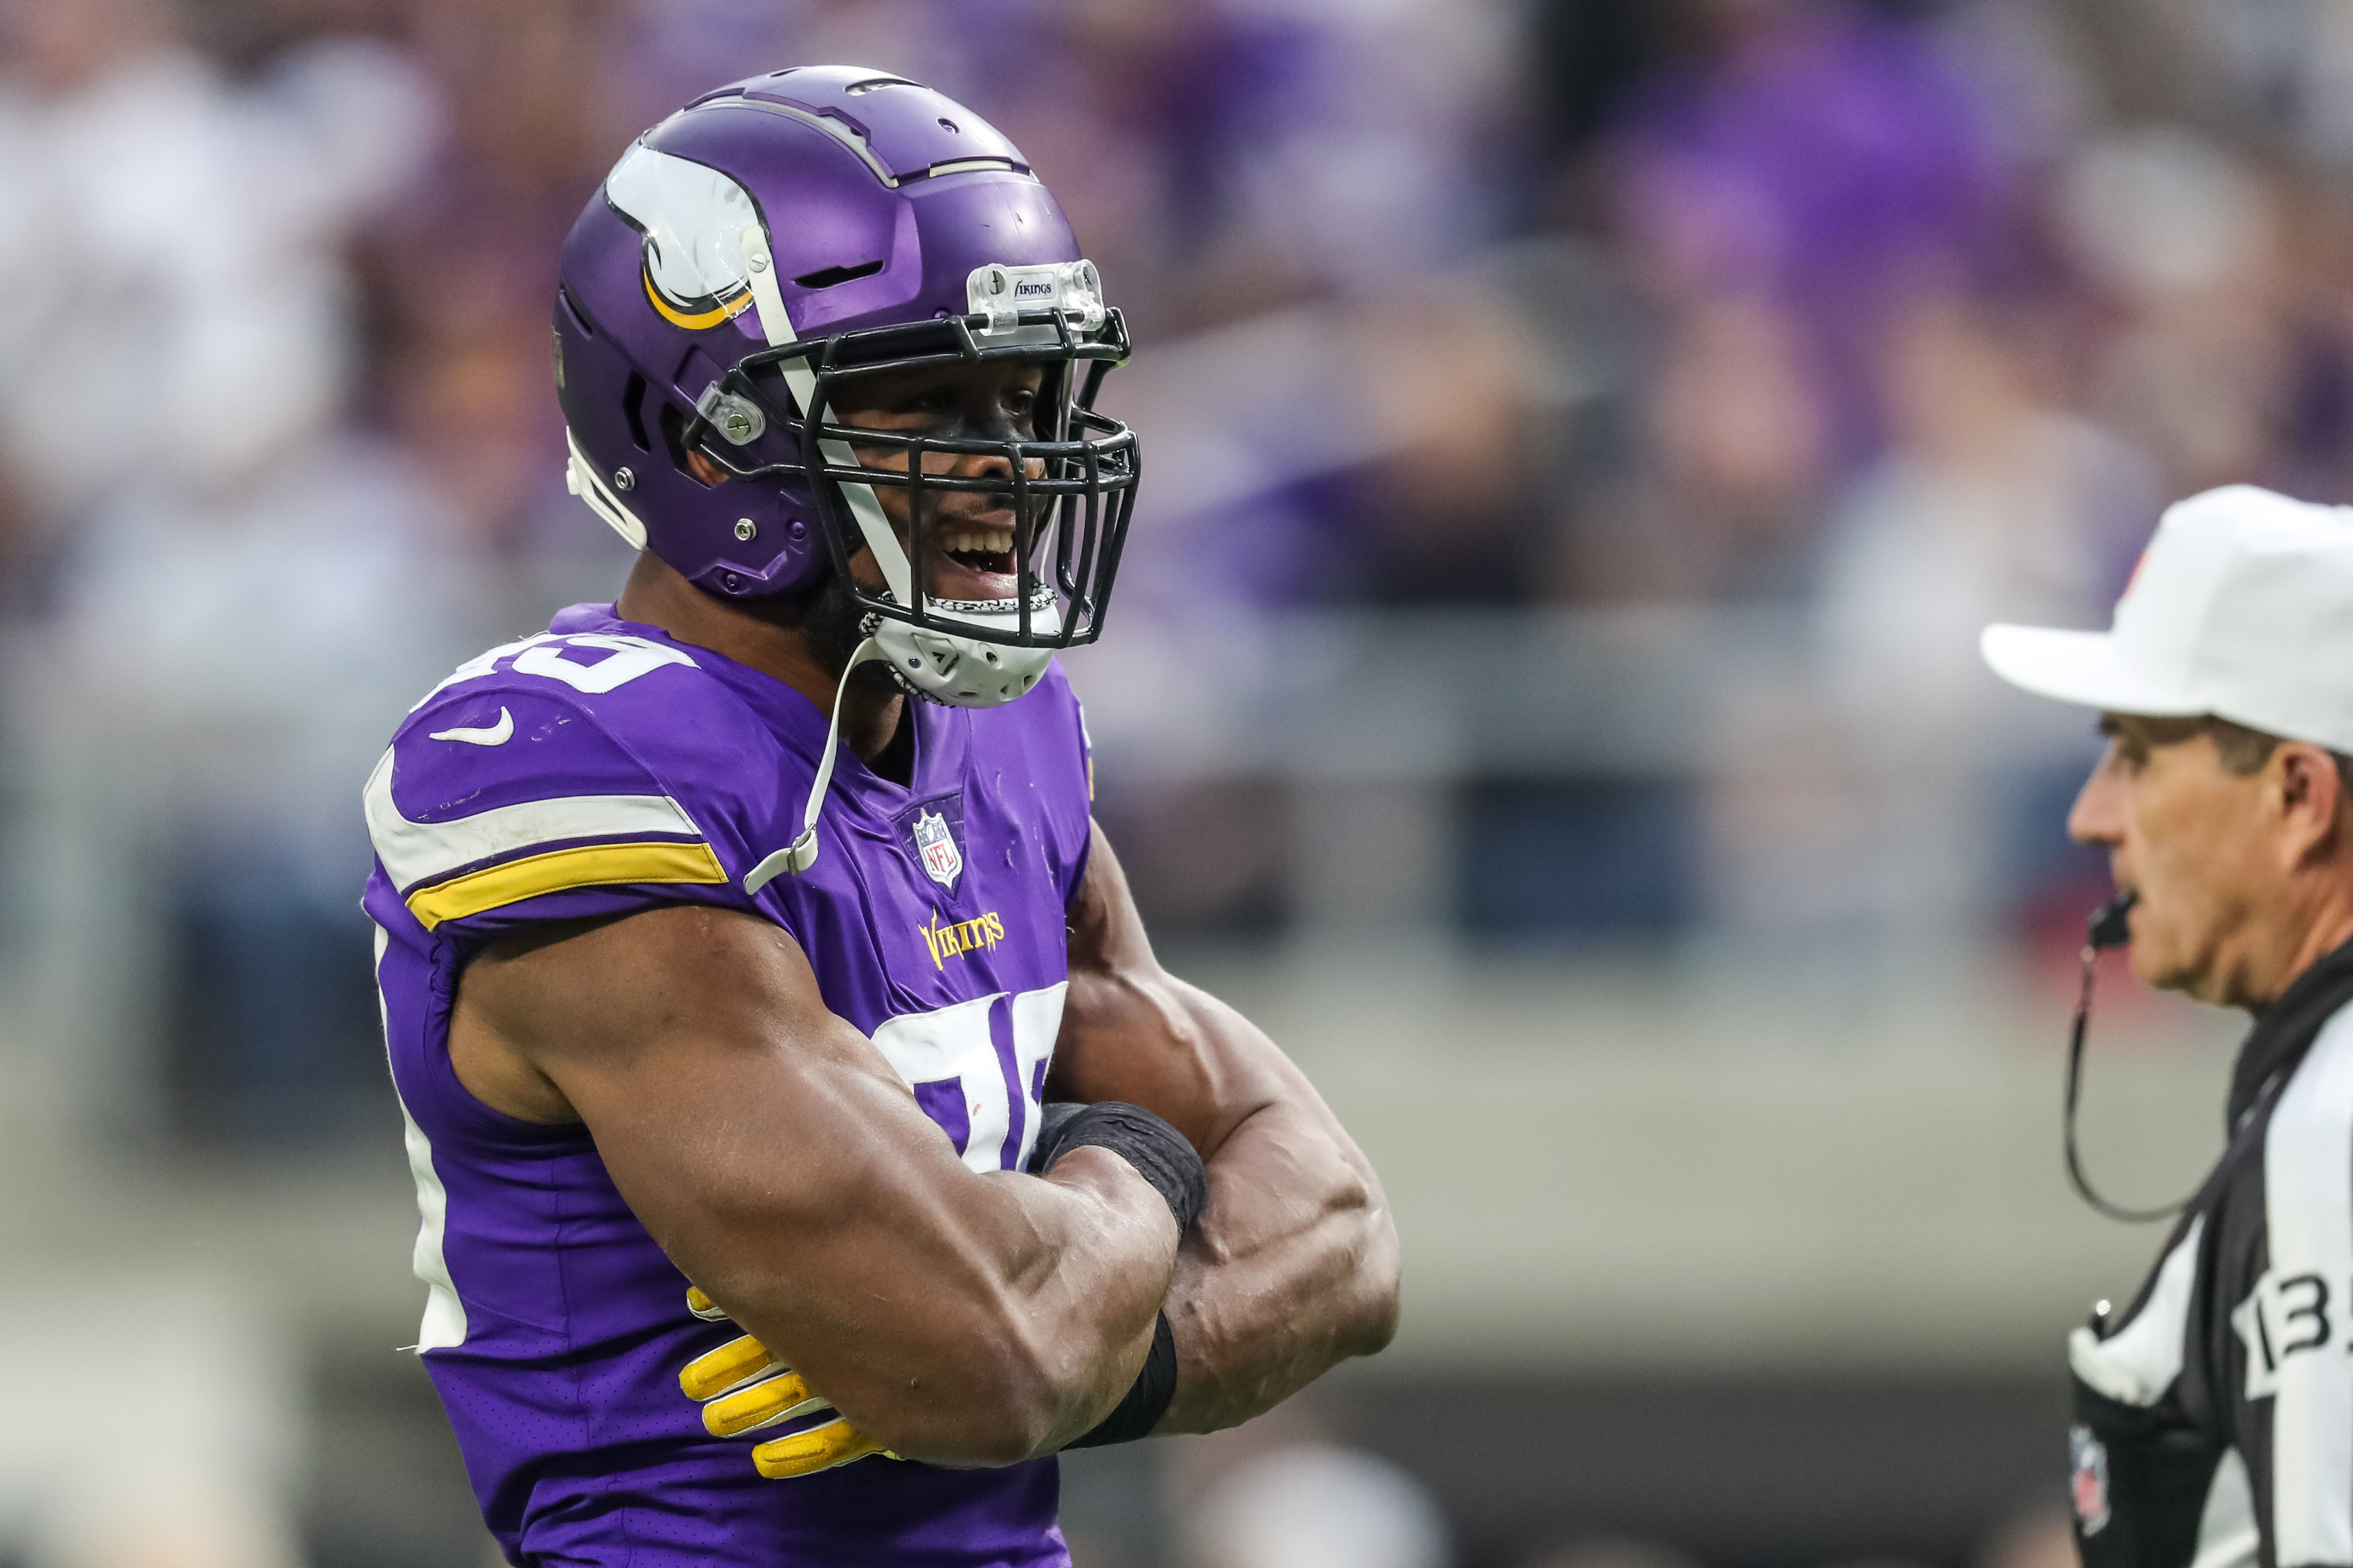 Unnamed Illness Leaves Vikings Star Sidelined for 2nd Day